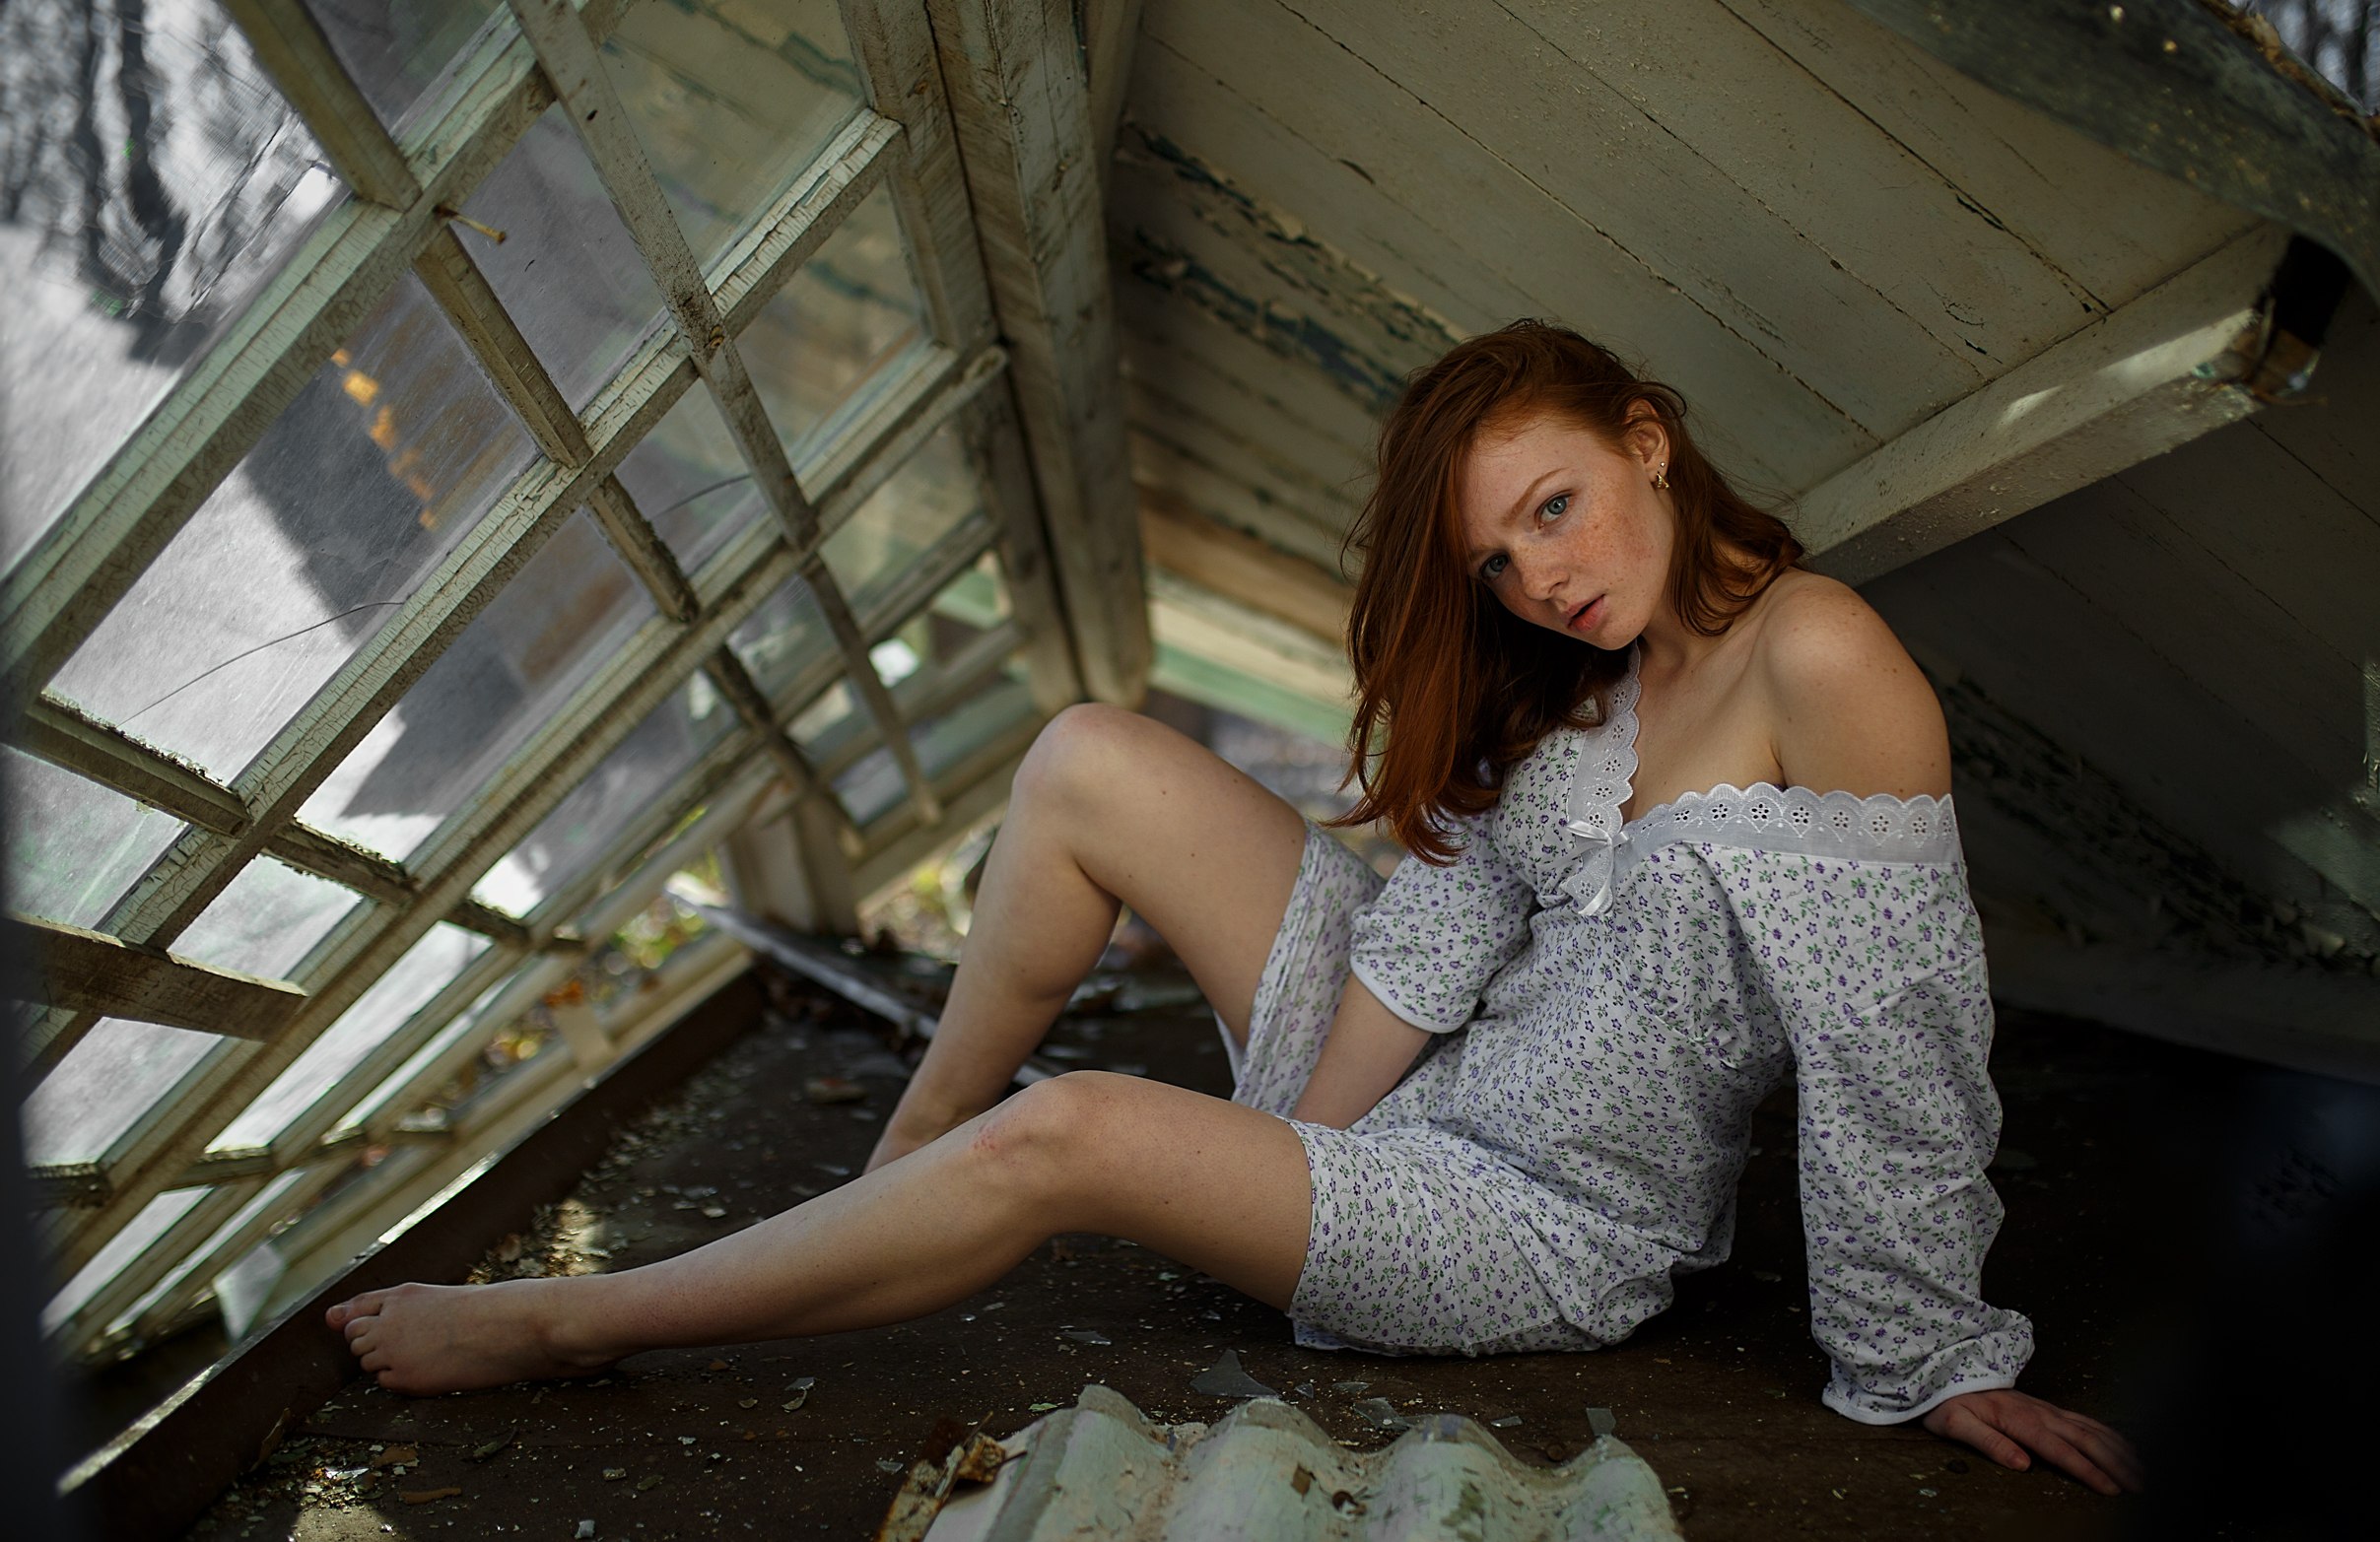 People 2415x1565 Sergey Nevzorov redhead women model looking at viewer dress abandoned freckles sitting bare shoulders on the floor barefoot